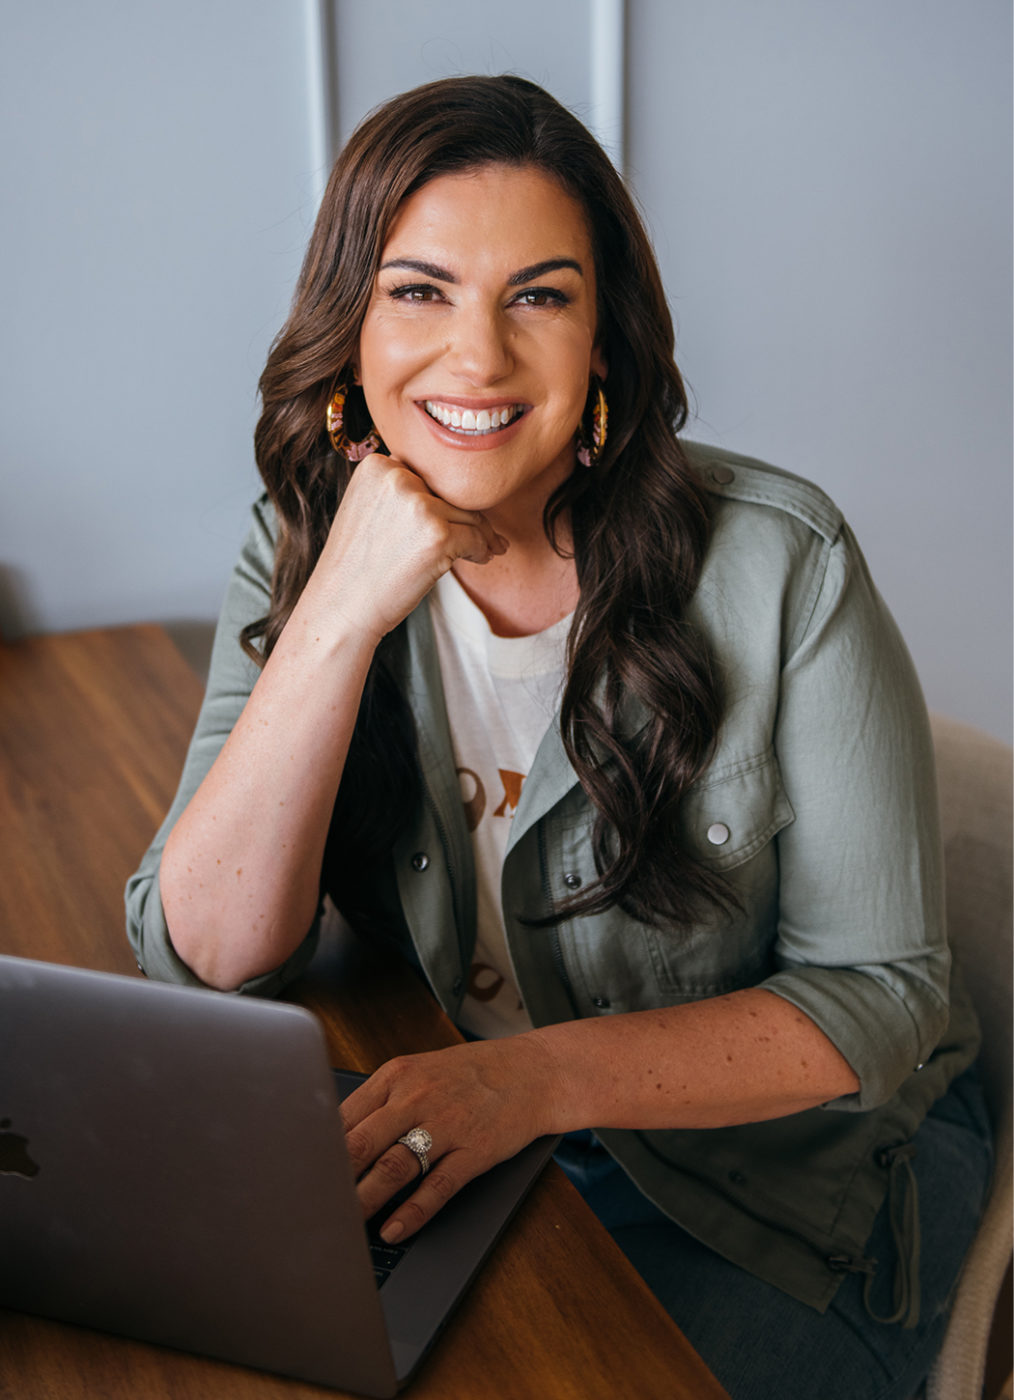 Amy Porterfield smiling with macbook and green jacket